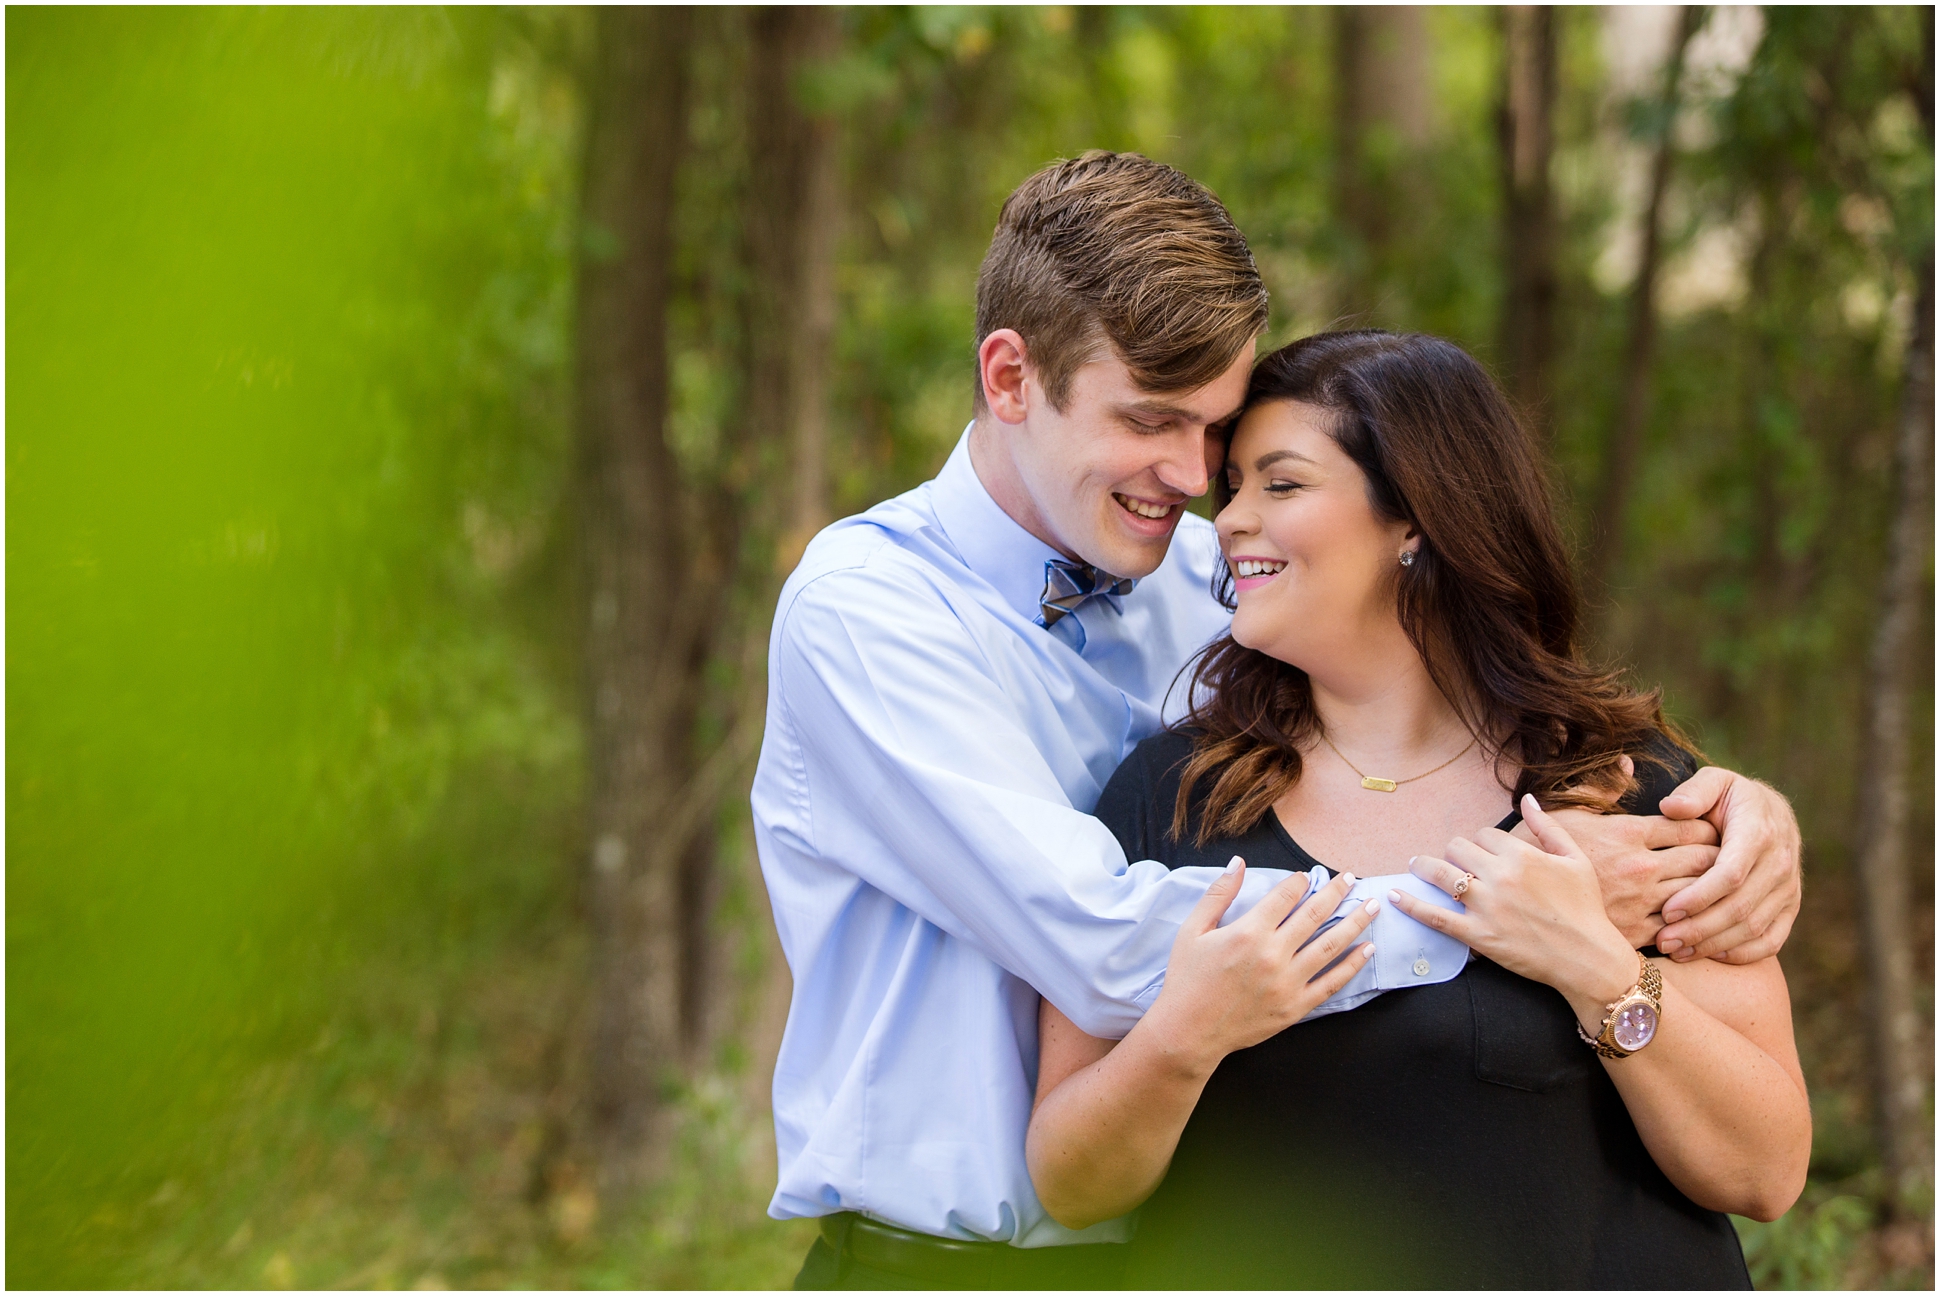 Surprise Engagement Proposal | Two Chics Photography | www.twochicsphotography.com